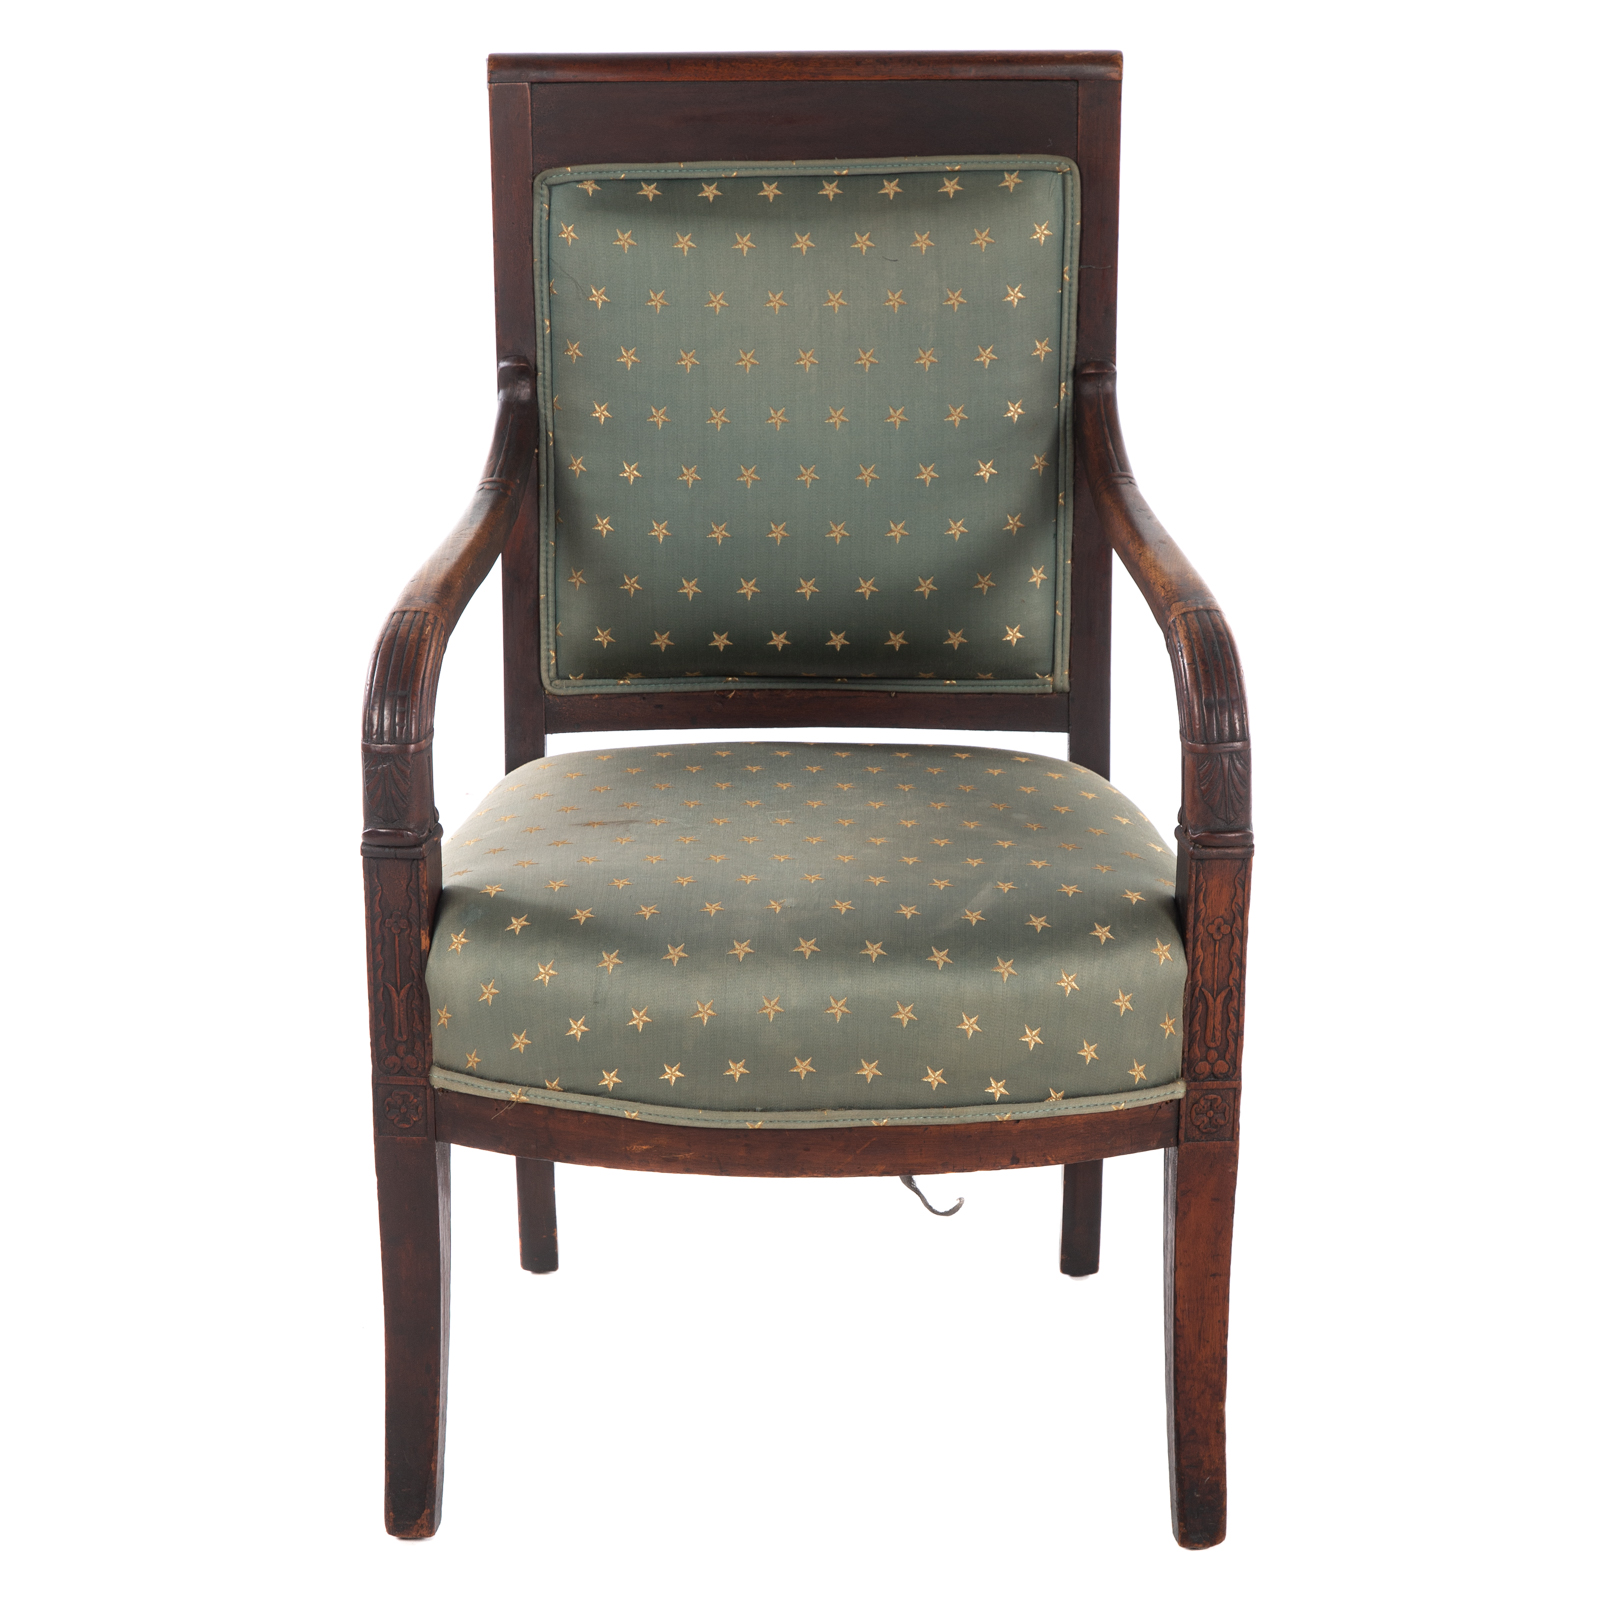 FEDERAL STYLE UPHOLSTERED ARMCHAIR 36980e